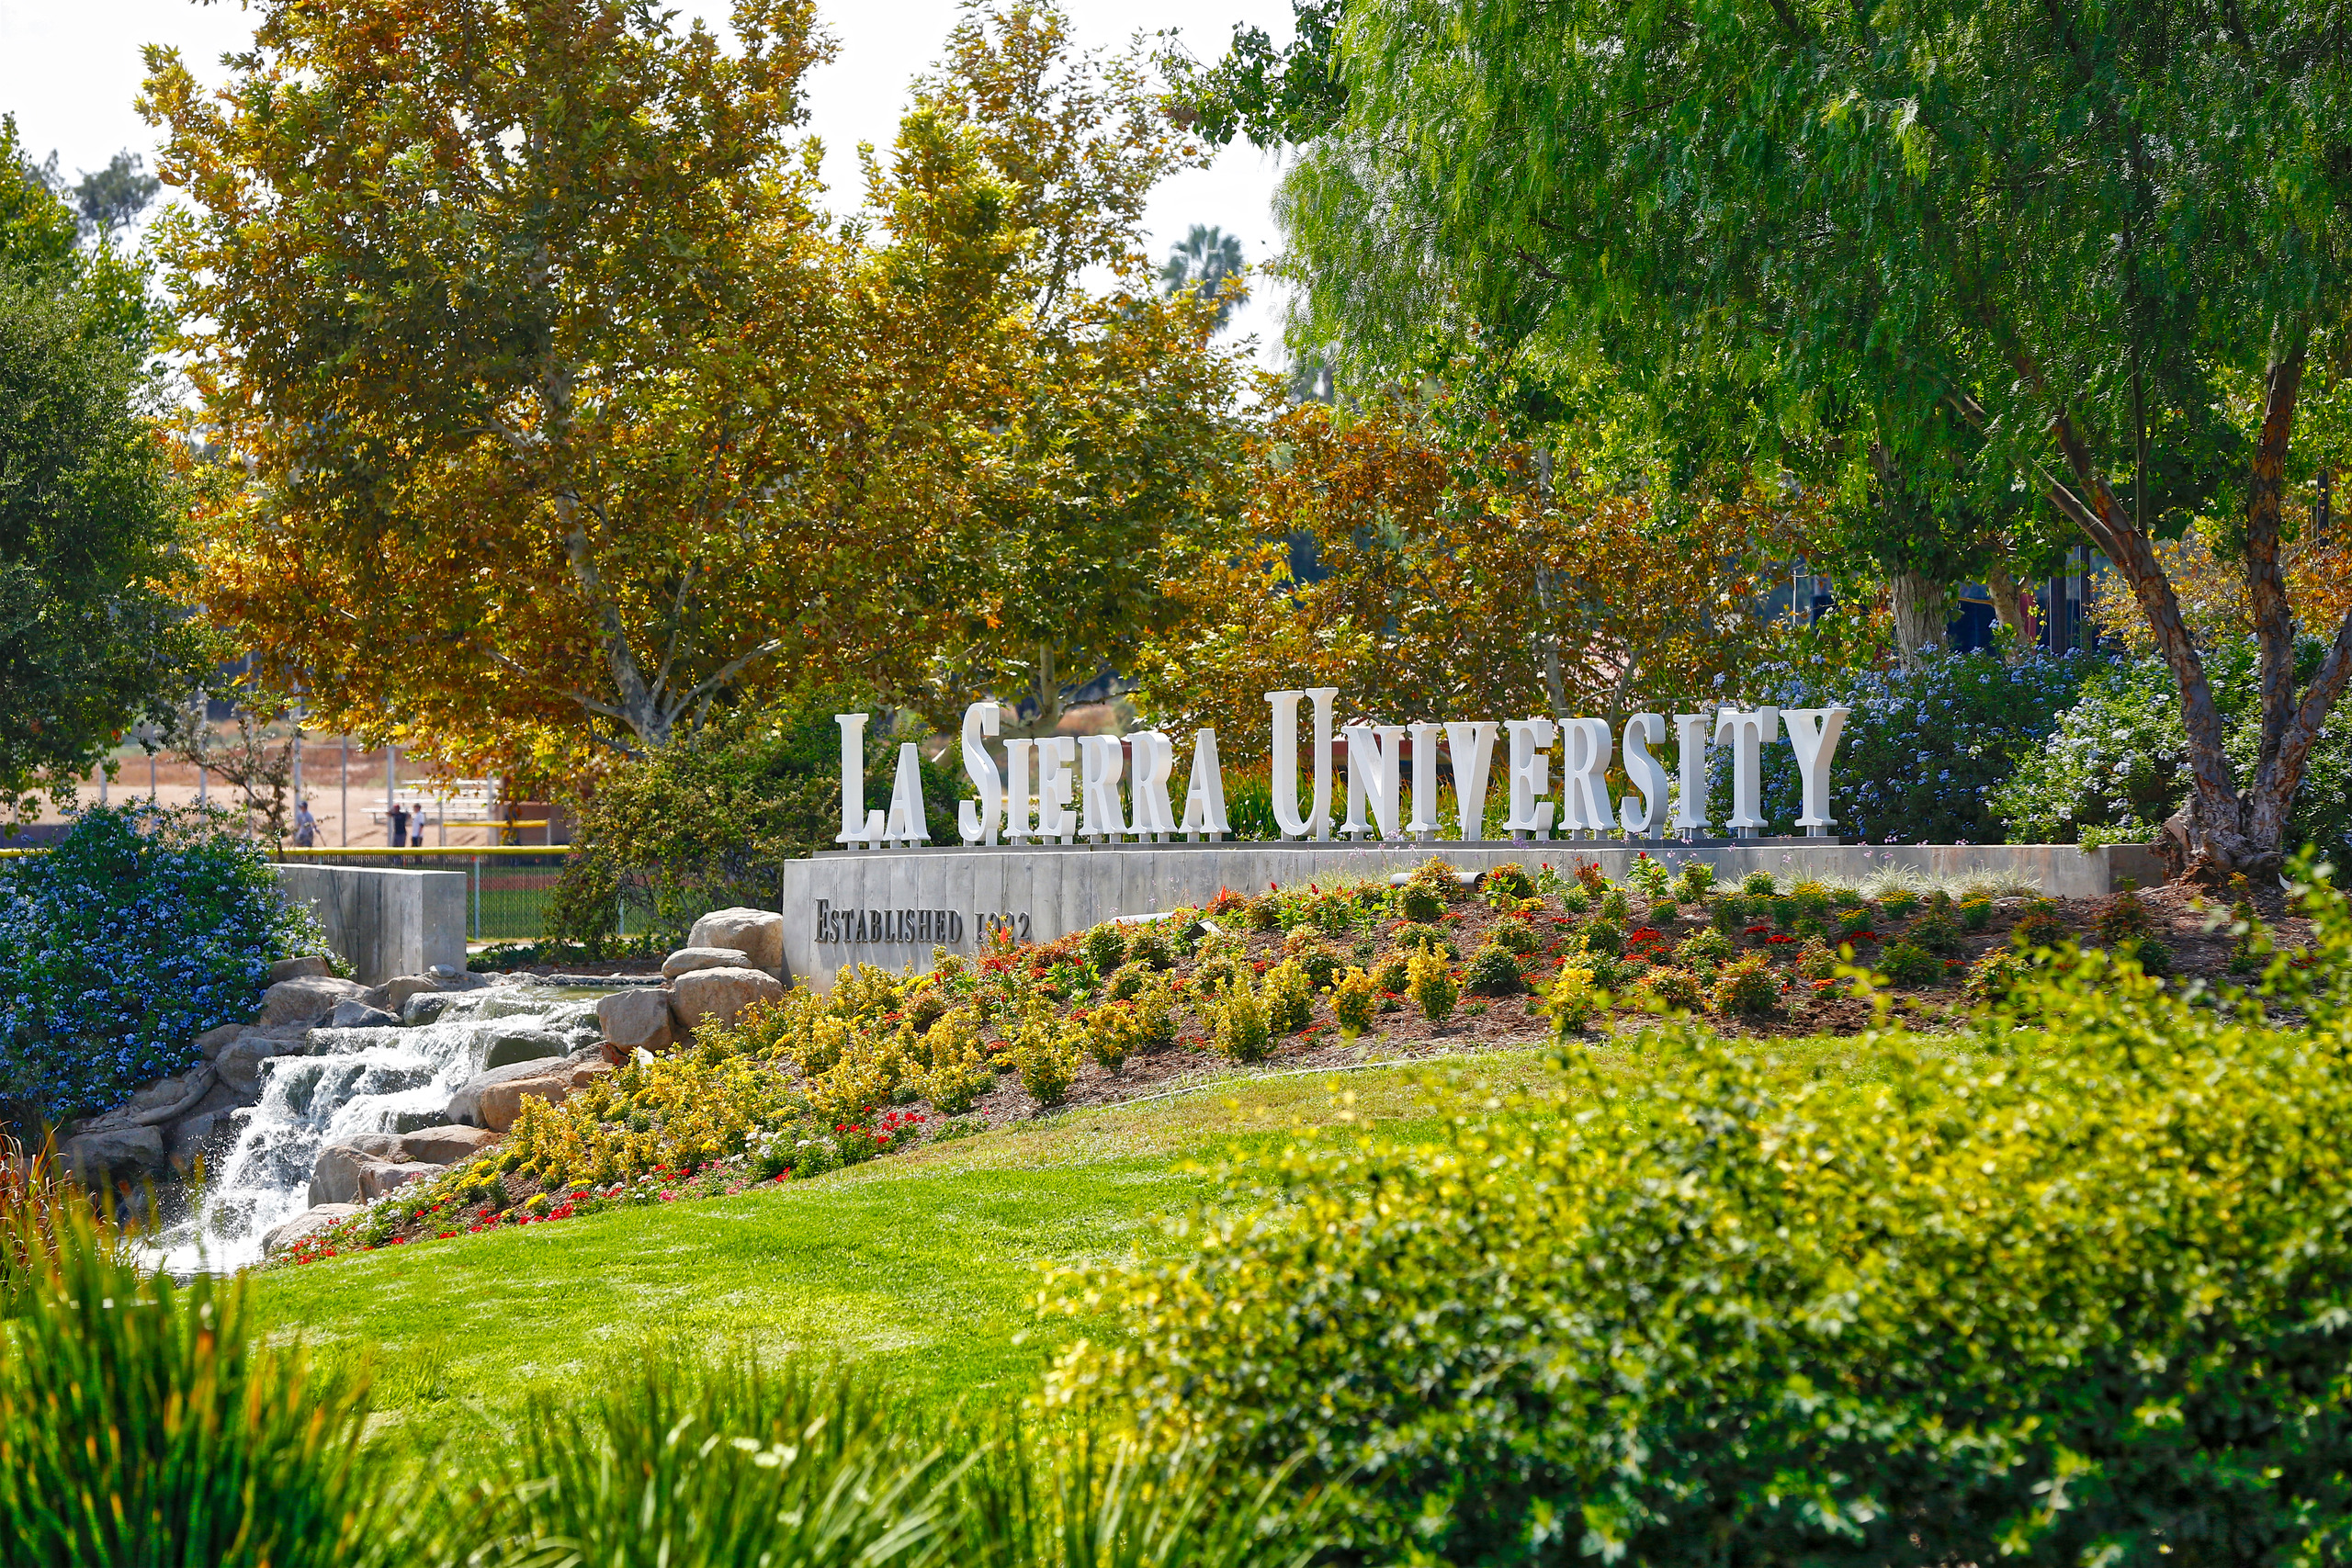 a photo of a sign reading "La Sierra University" surrounded by trees, green grass, plants, and a waterfall. 